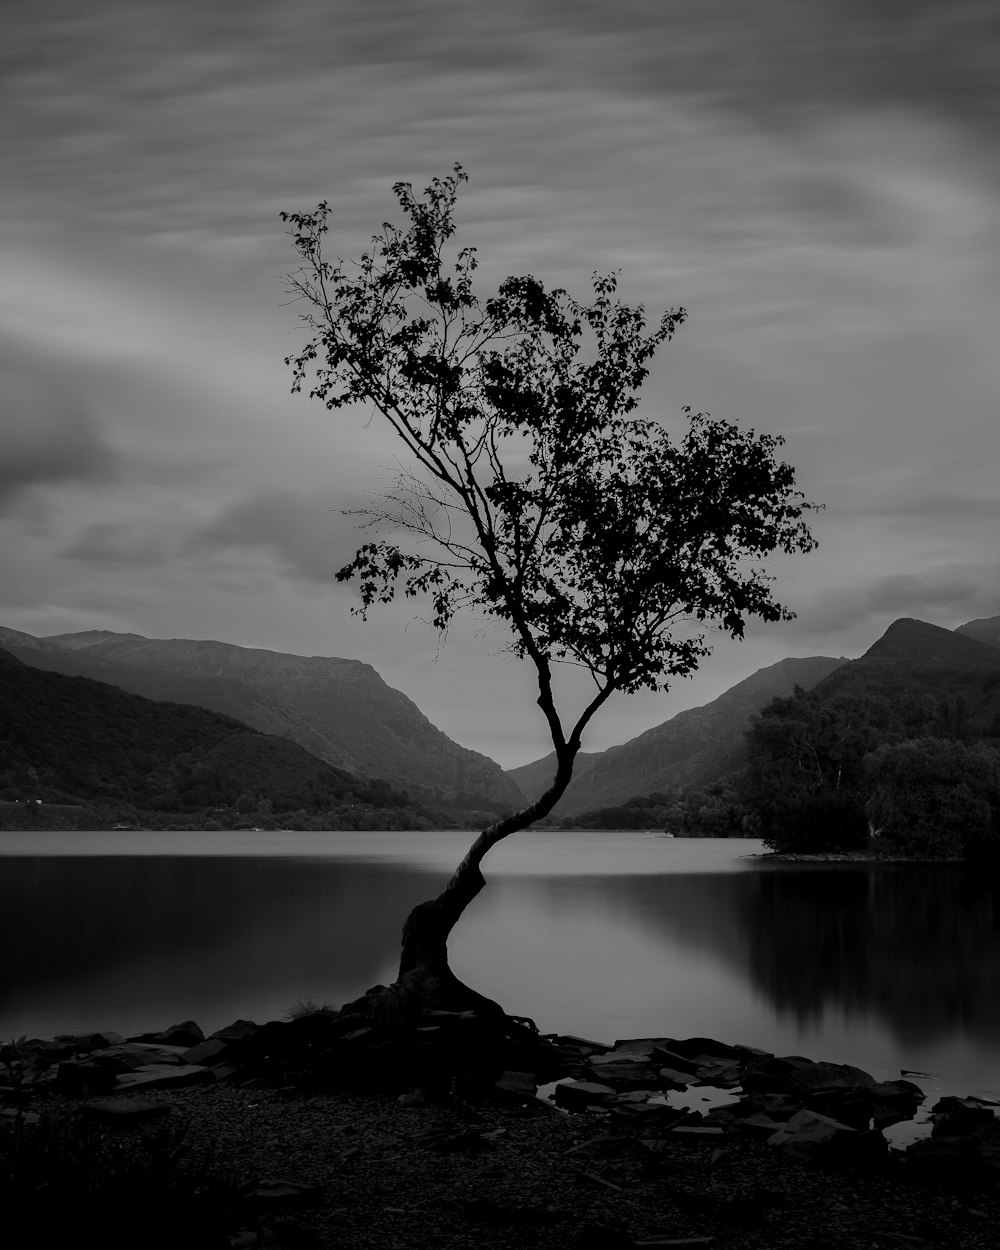 a black and white photo of a tree by a lake